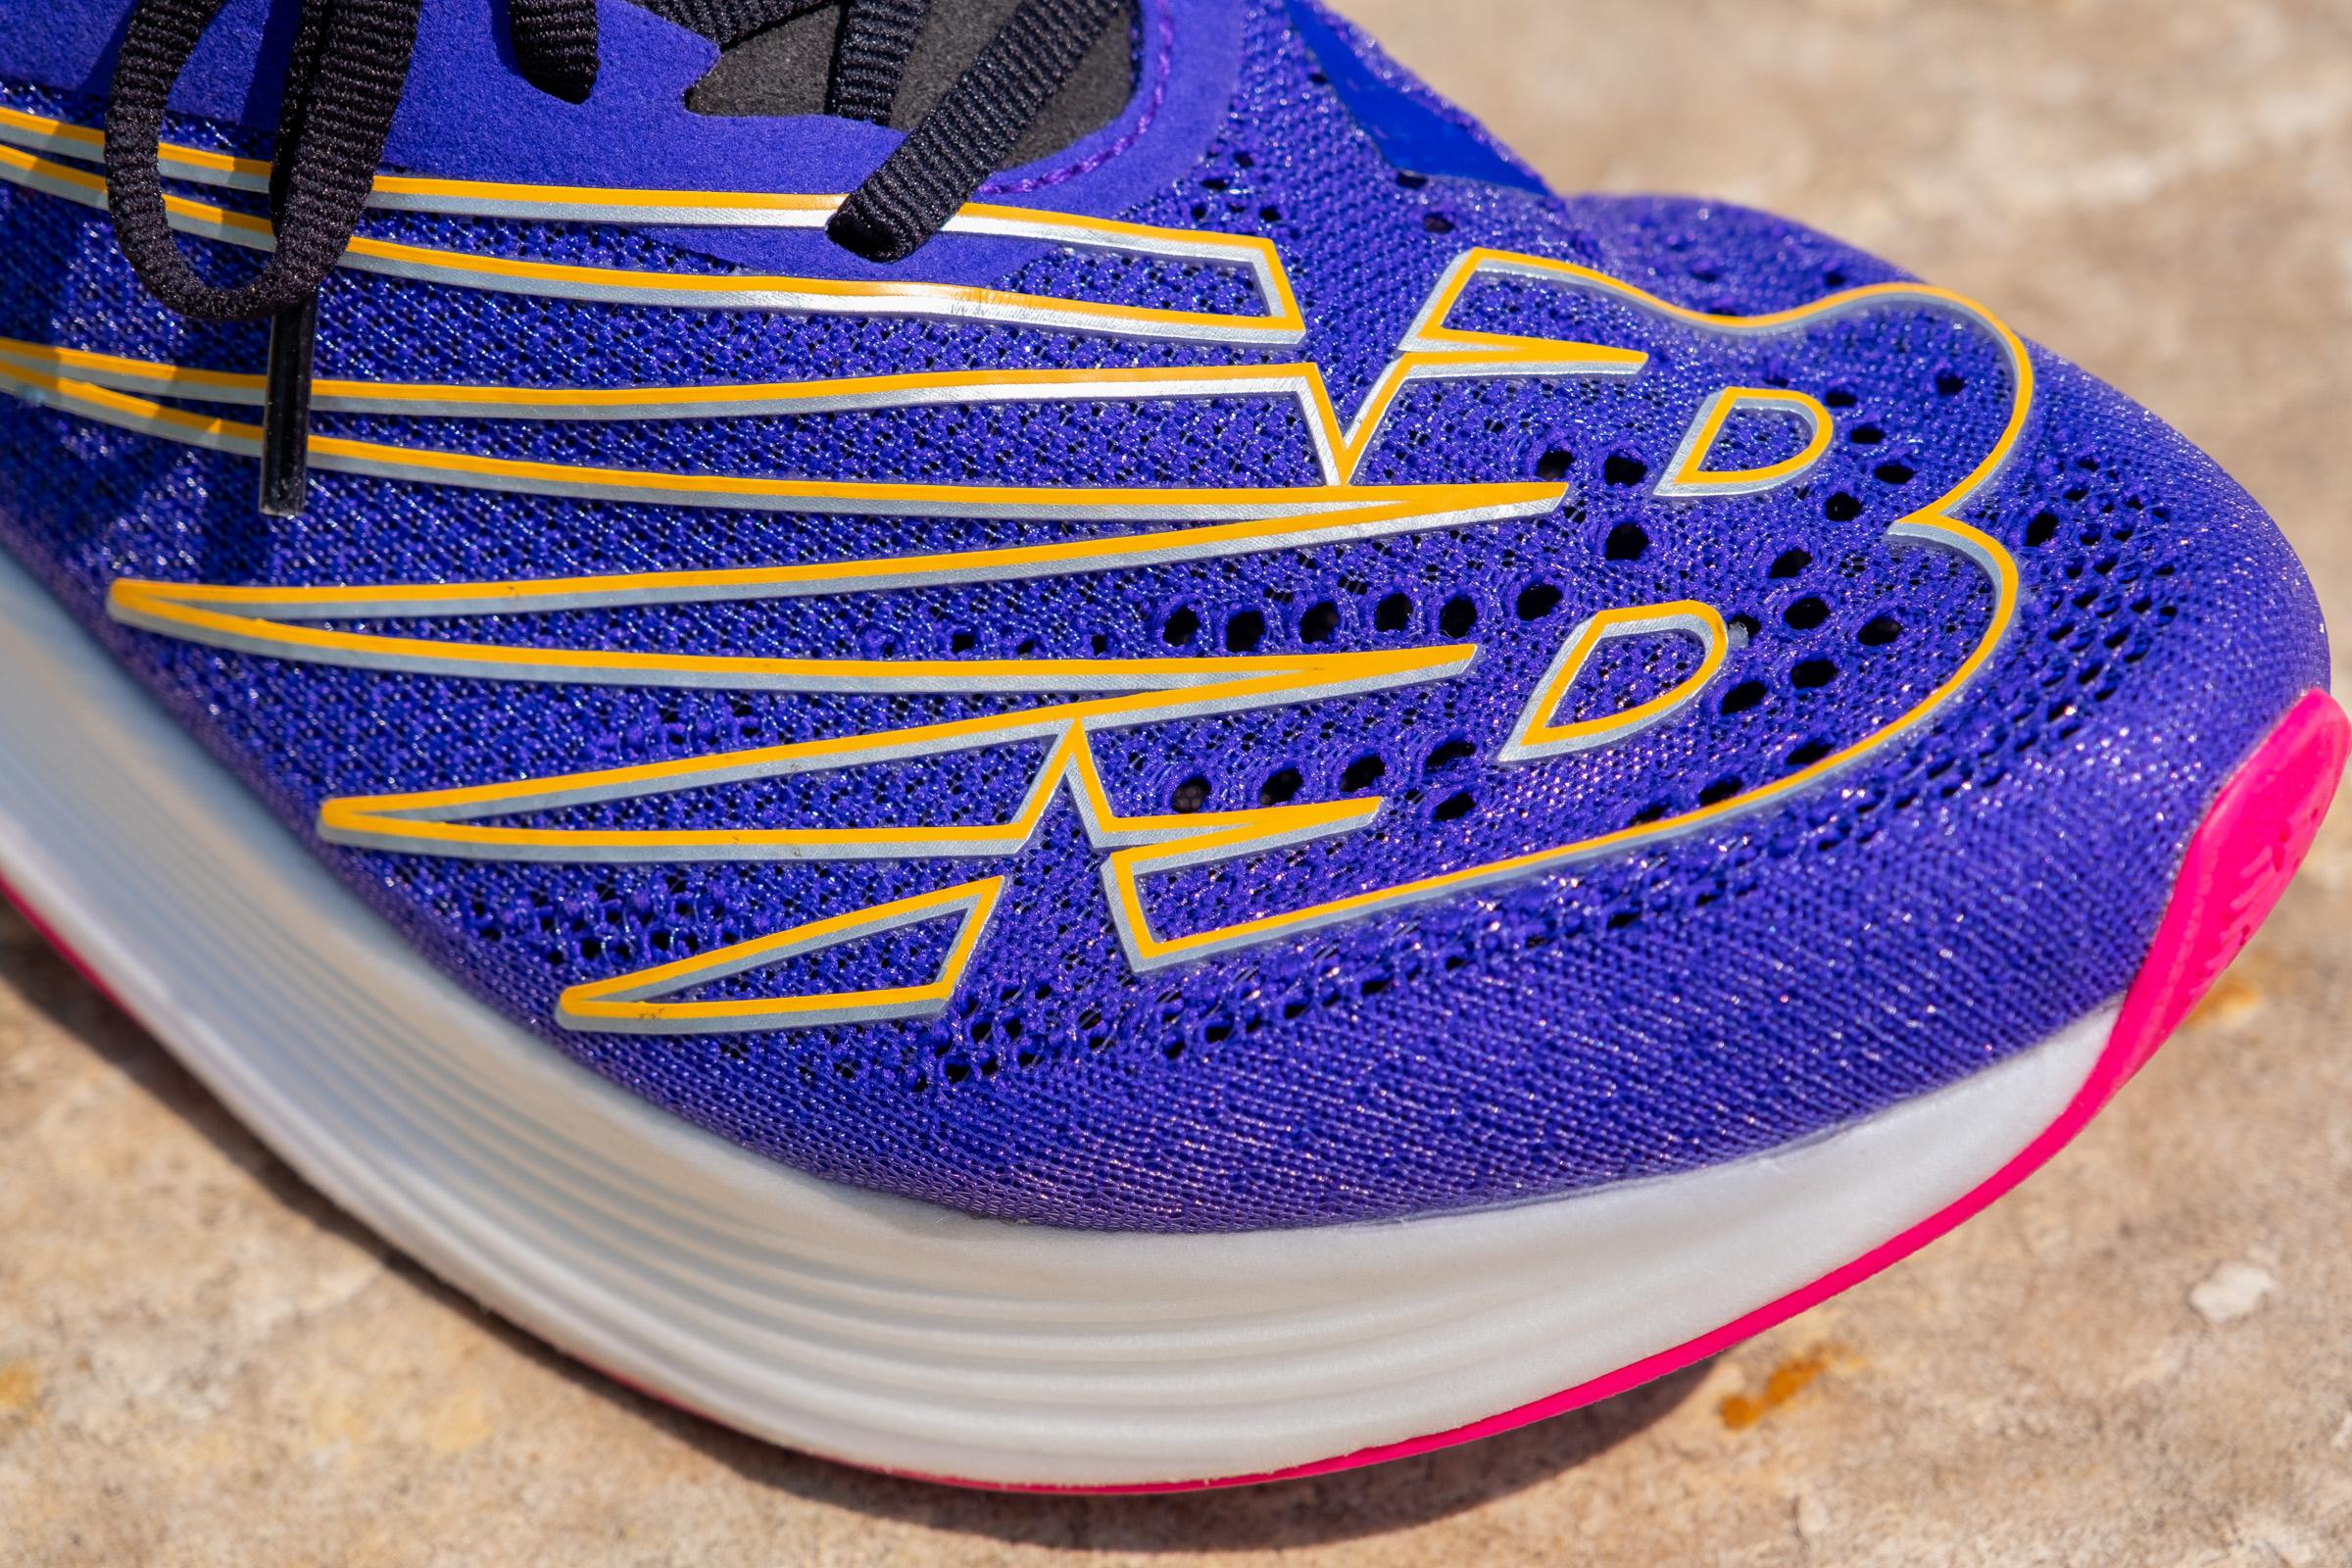 New Balance FuelCell RC Elite v2 Review, Facts, Comparison 